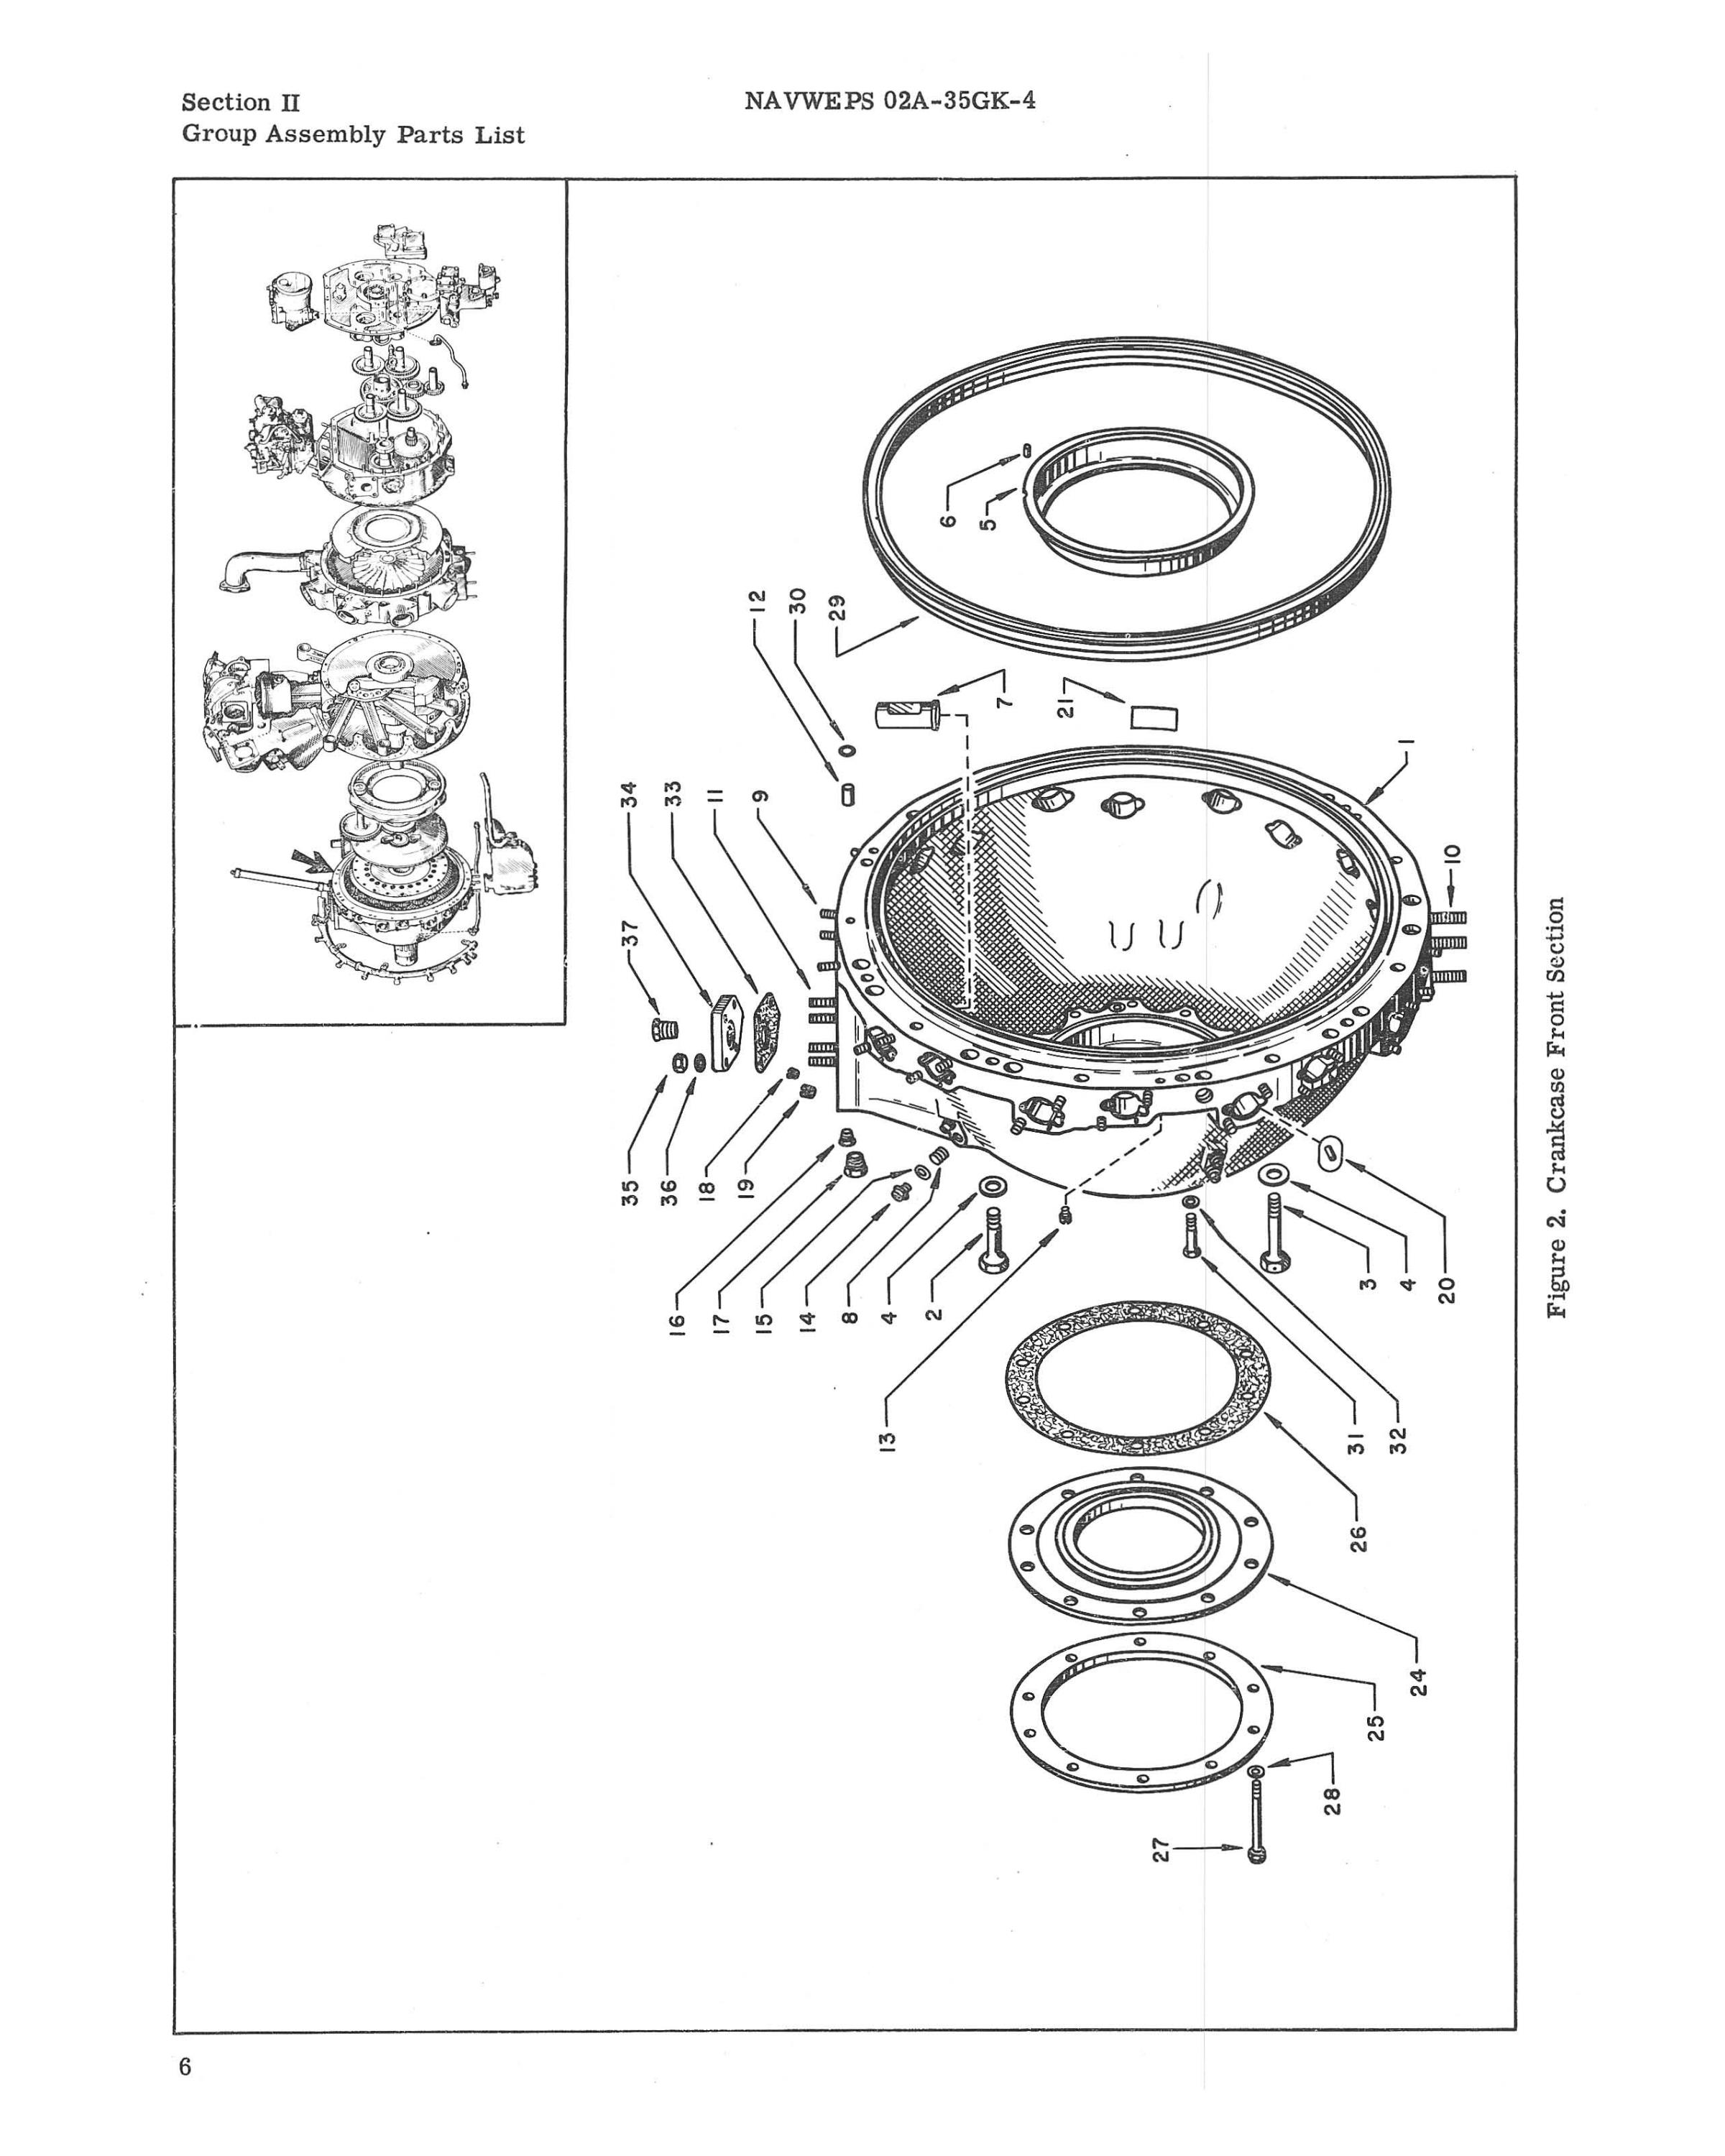 Sample page 12 from AirCorps Library document: Illustrated Parts Breakdown for R-1820-80 Engines